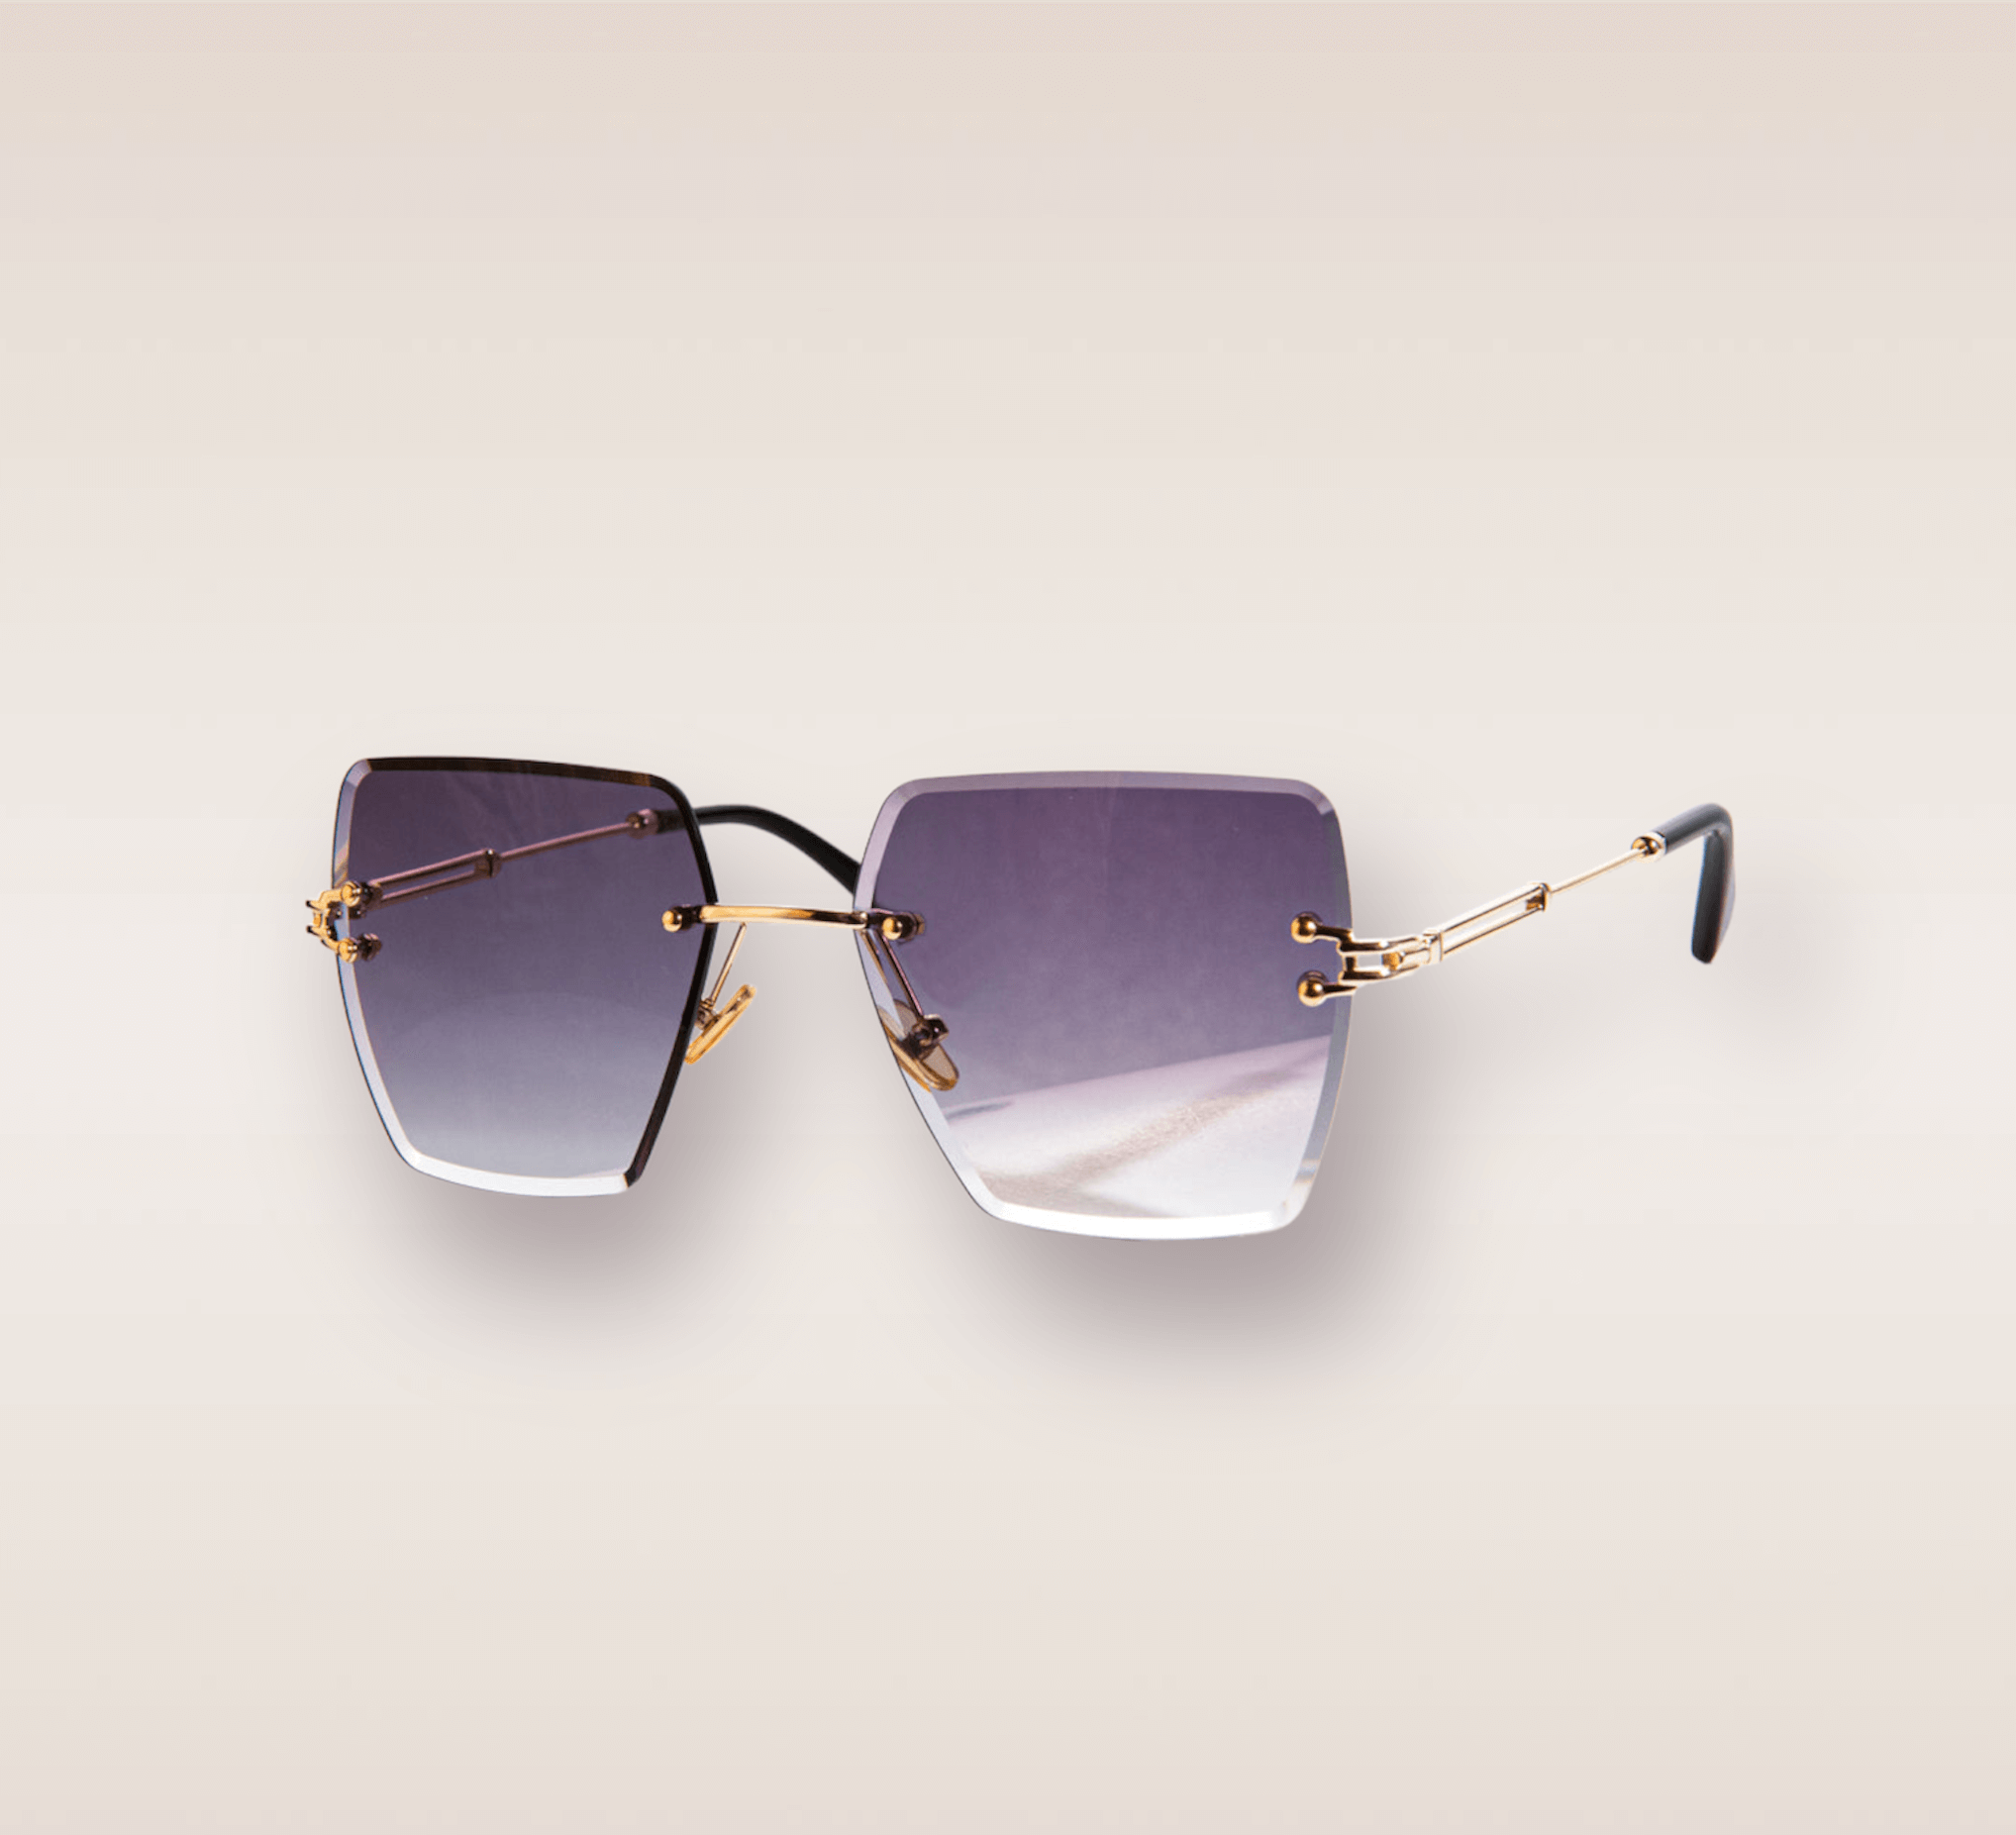 In this up-close shot, we are introduced to the captivating Luke Cage frames, a stylish and sophisticated eyewear option. The rimless frames feature a mesmerizing deep purple gradient hue. The gold arms add a touch of opulence and refinement, complimenting the purple tones with a warm metallic accent. These frames are a true fashion statement, combining modern design with a touch of luxury. 